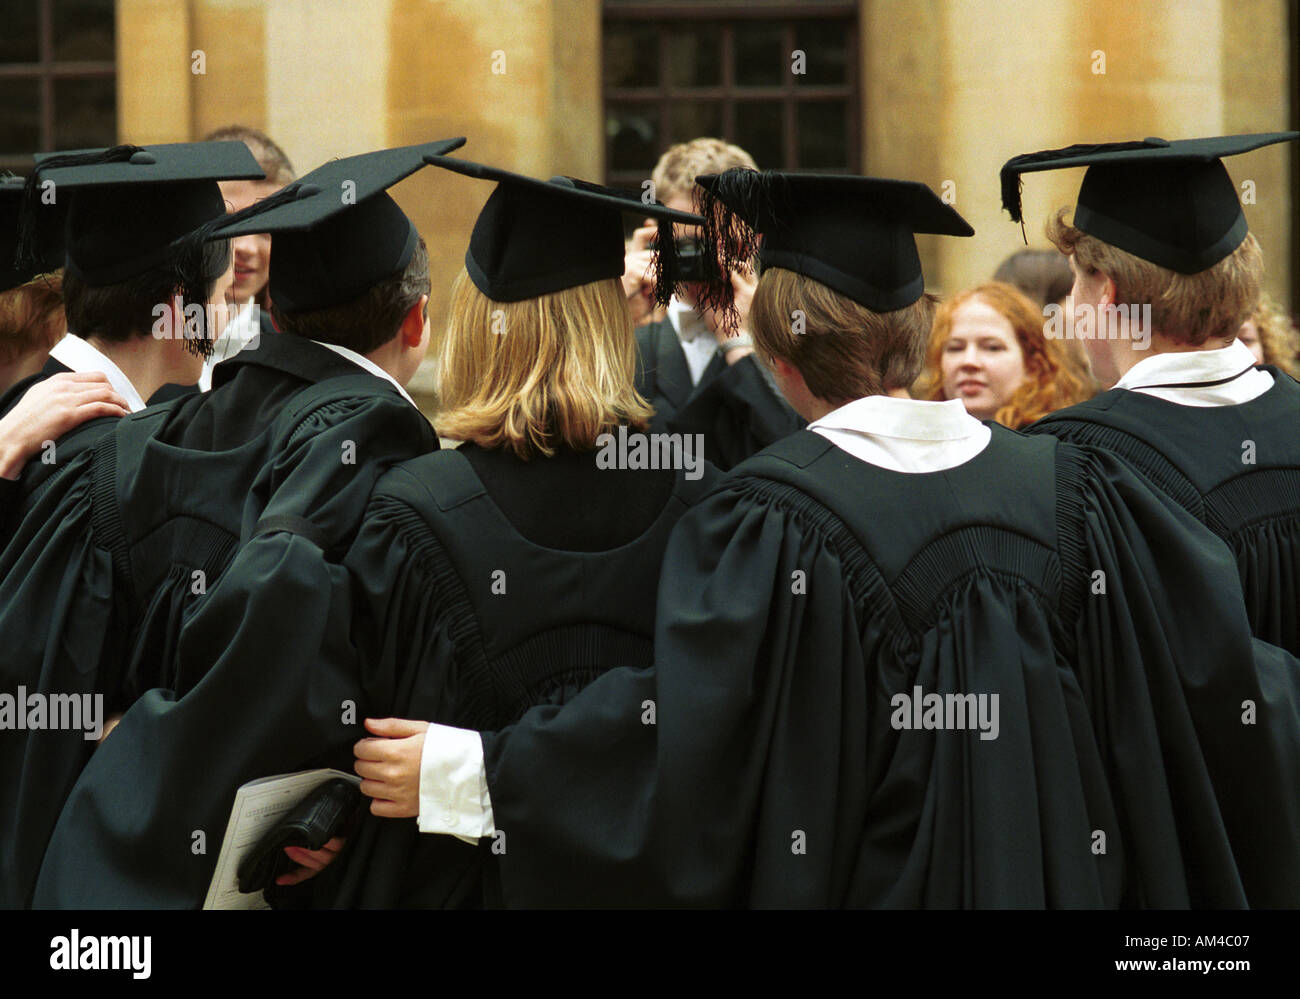 Students pose for pictures at Oxford University degree ceremony Stock